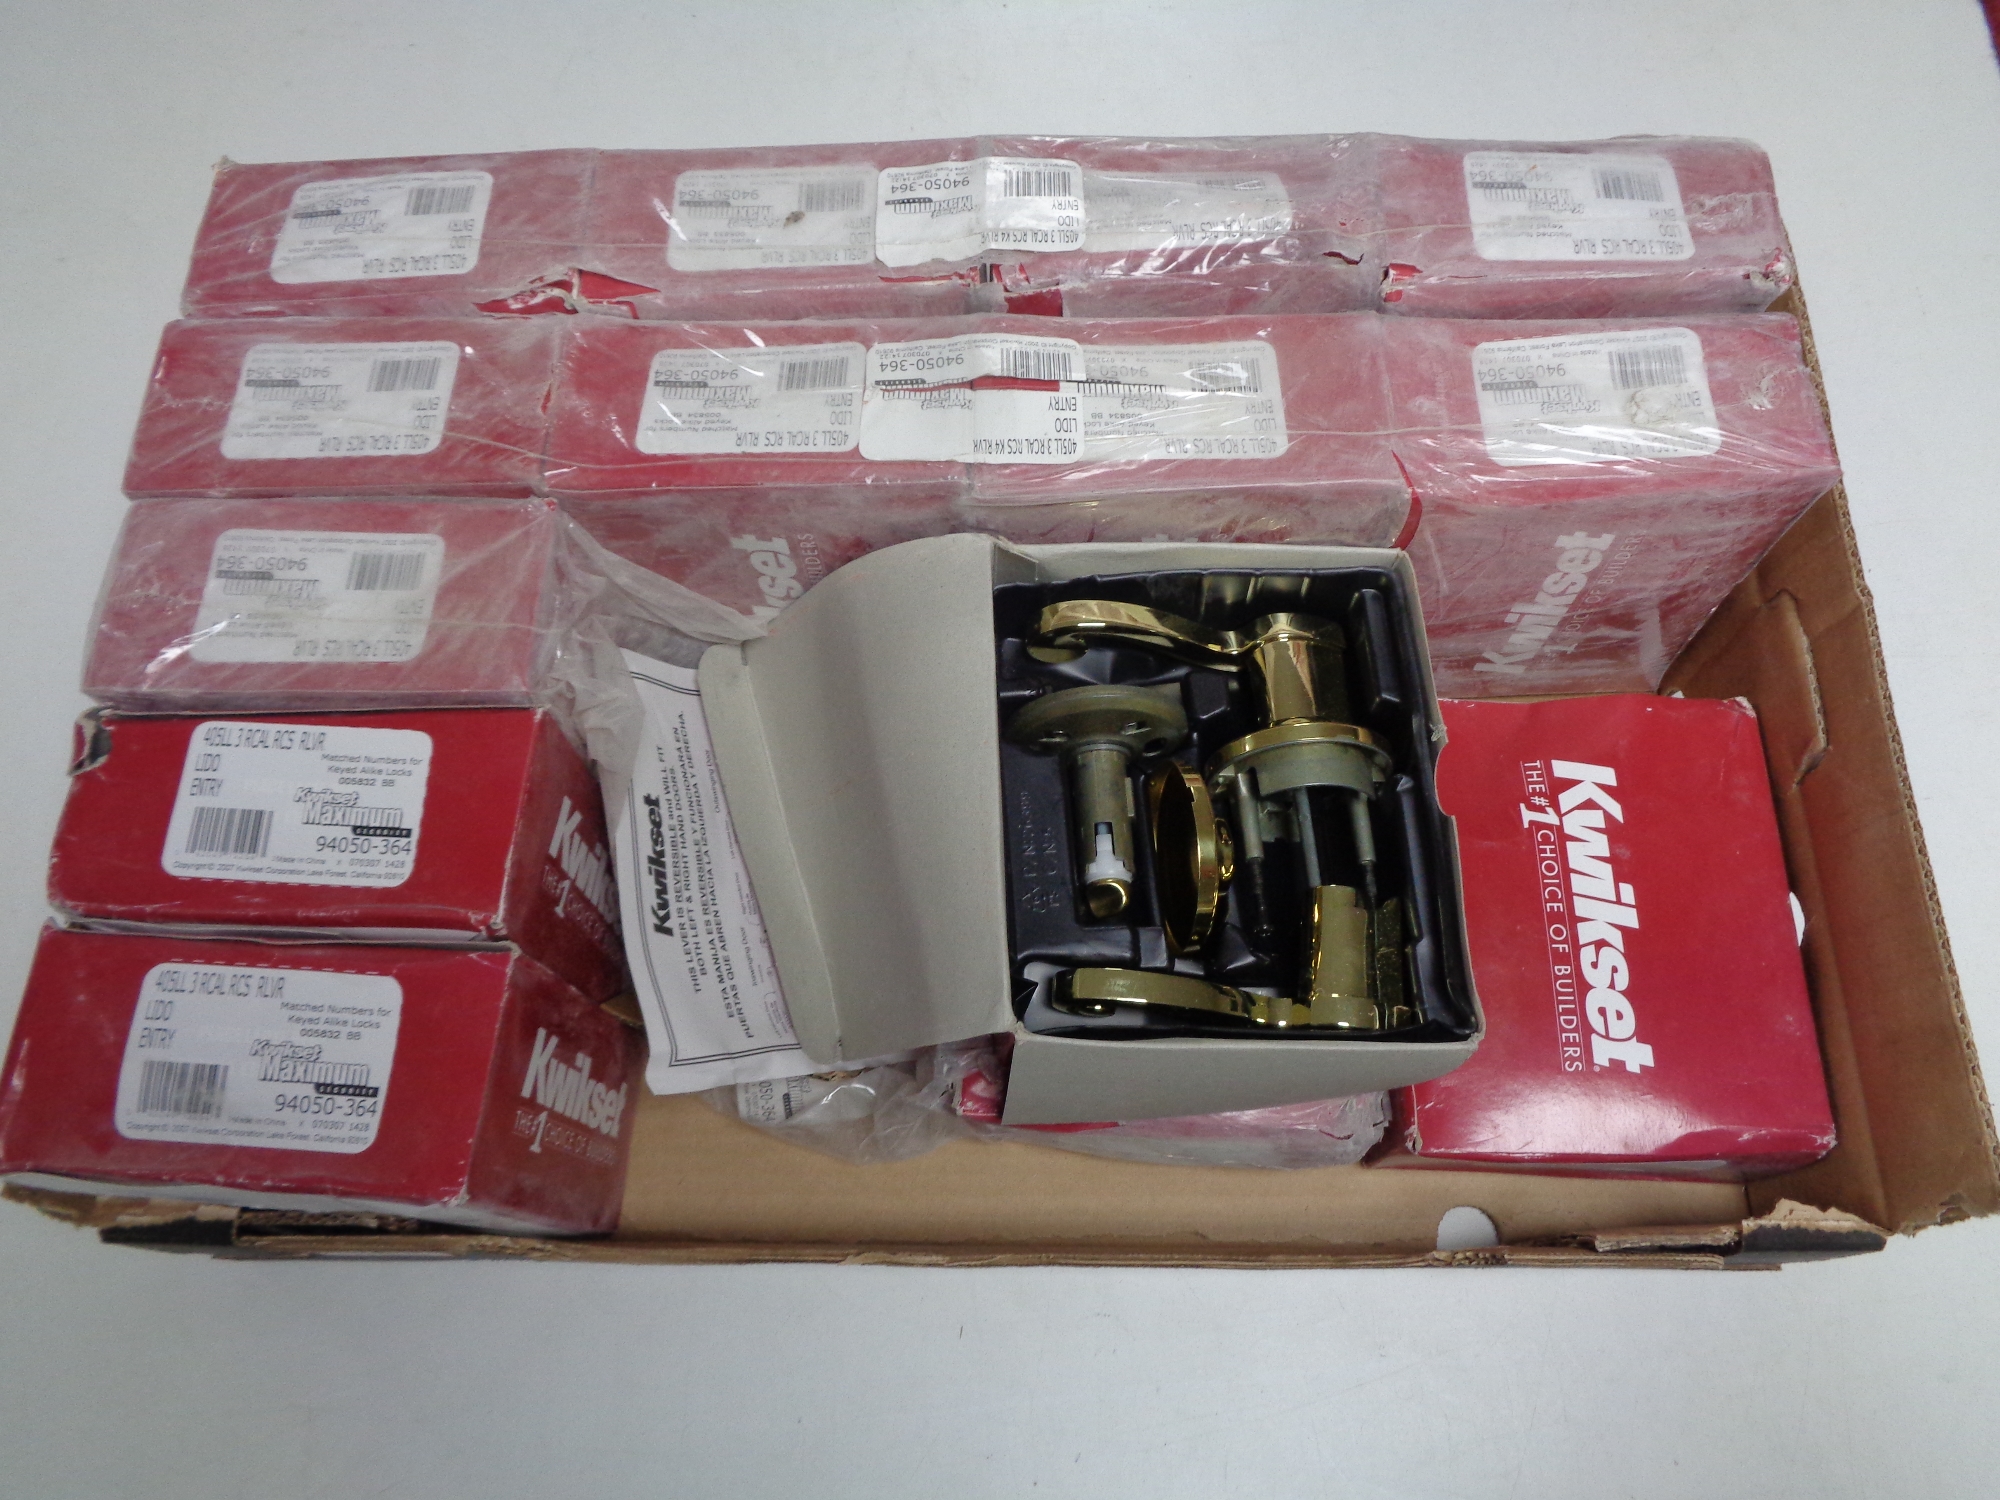 A box containing a quantity of Kwikset door handles.